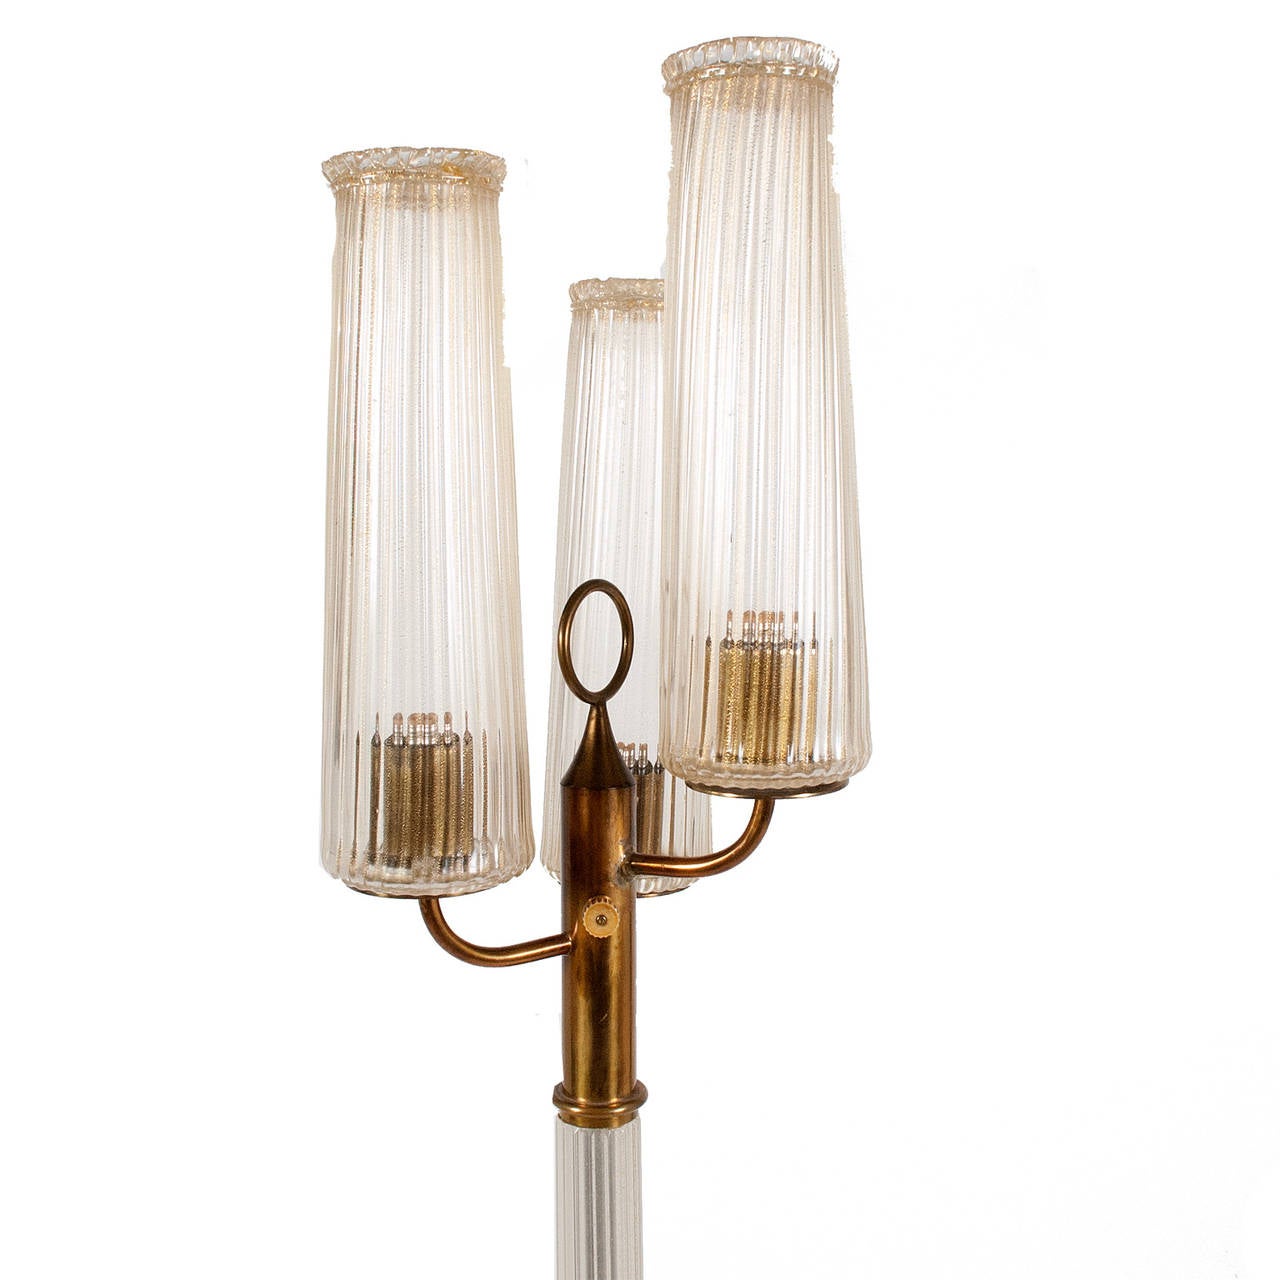 Three shade Murano floor lamp, brass and clear glass with gold flakes.